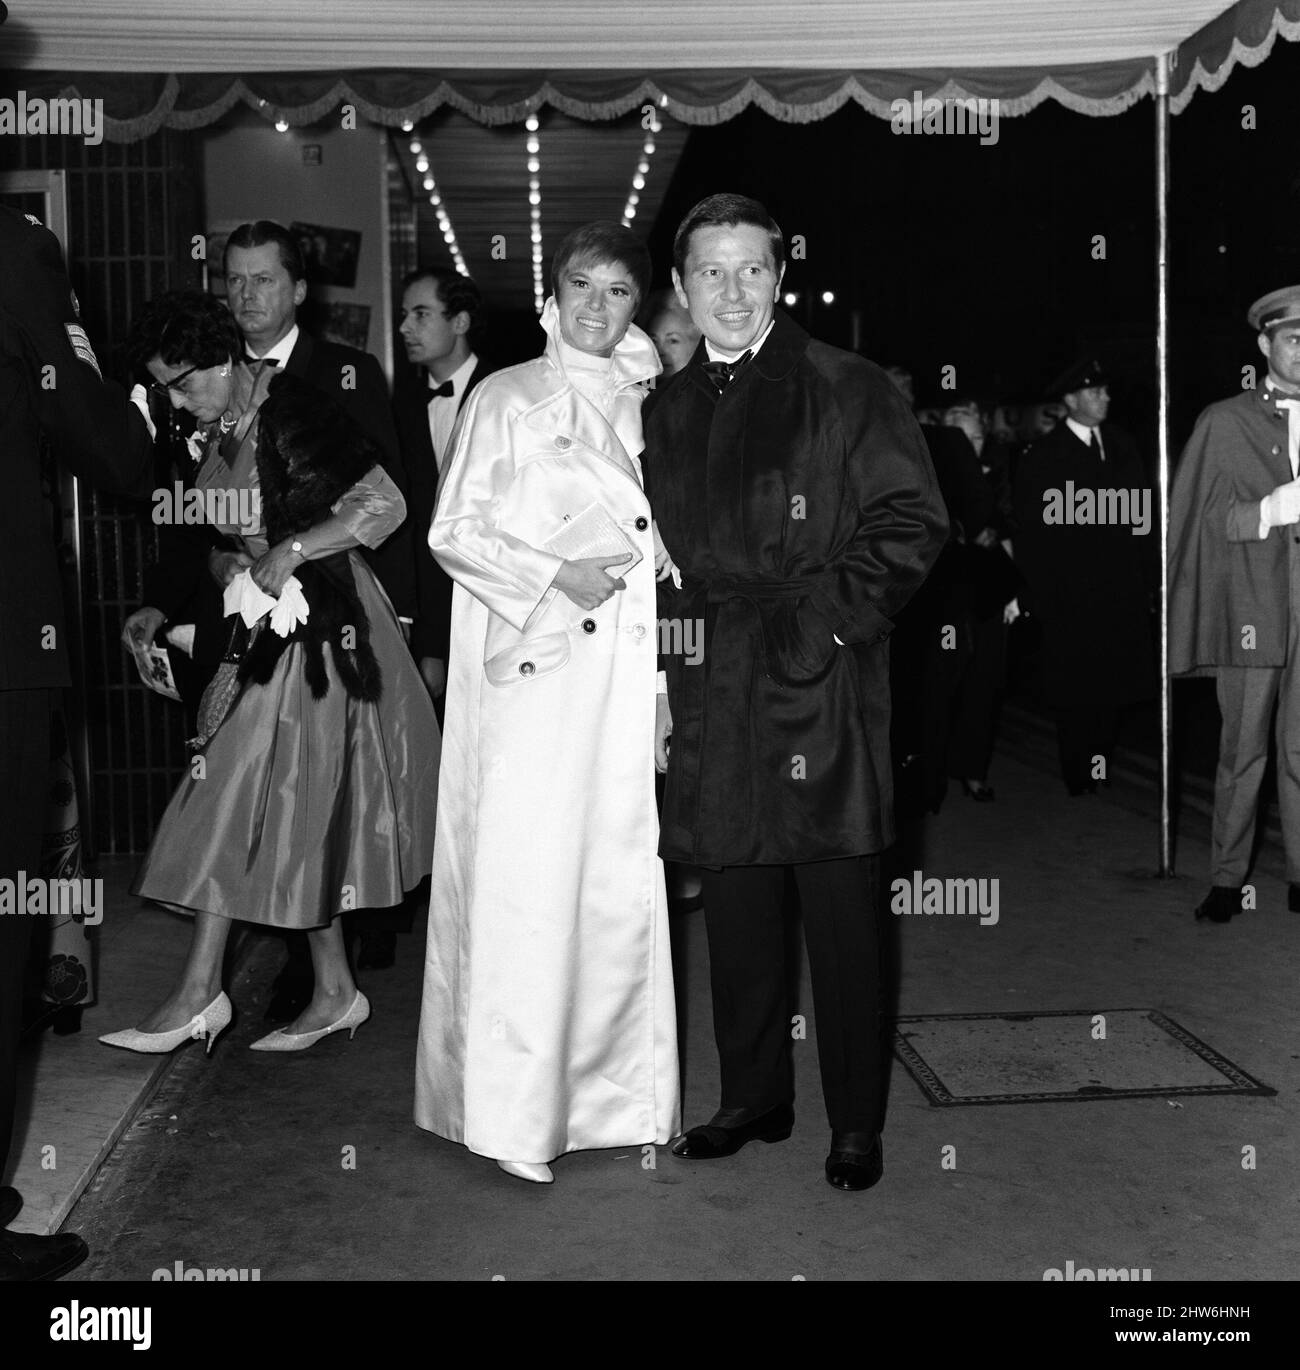 The Royal Charity Premier of 'Oliver!' in the presence of HRH Princess Margaret and Lord Snowdon, in aid of the NSPCC, sponsored by the Variety Club. Shani Wallis who plays Nancy in the film arriving at the Odeon with a friend. Odeon Theatre, Leicester Square. 26th September 1968. Stock Photo